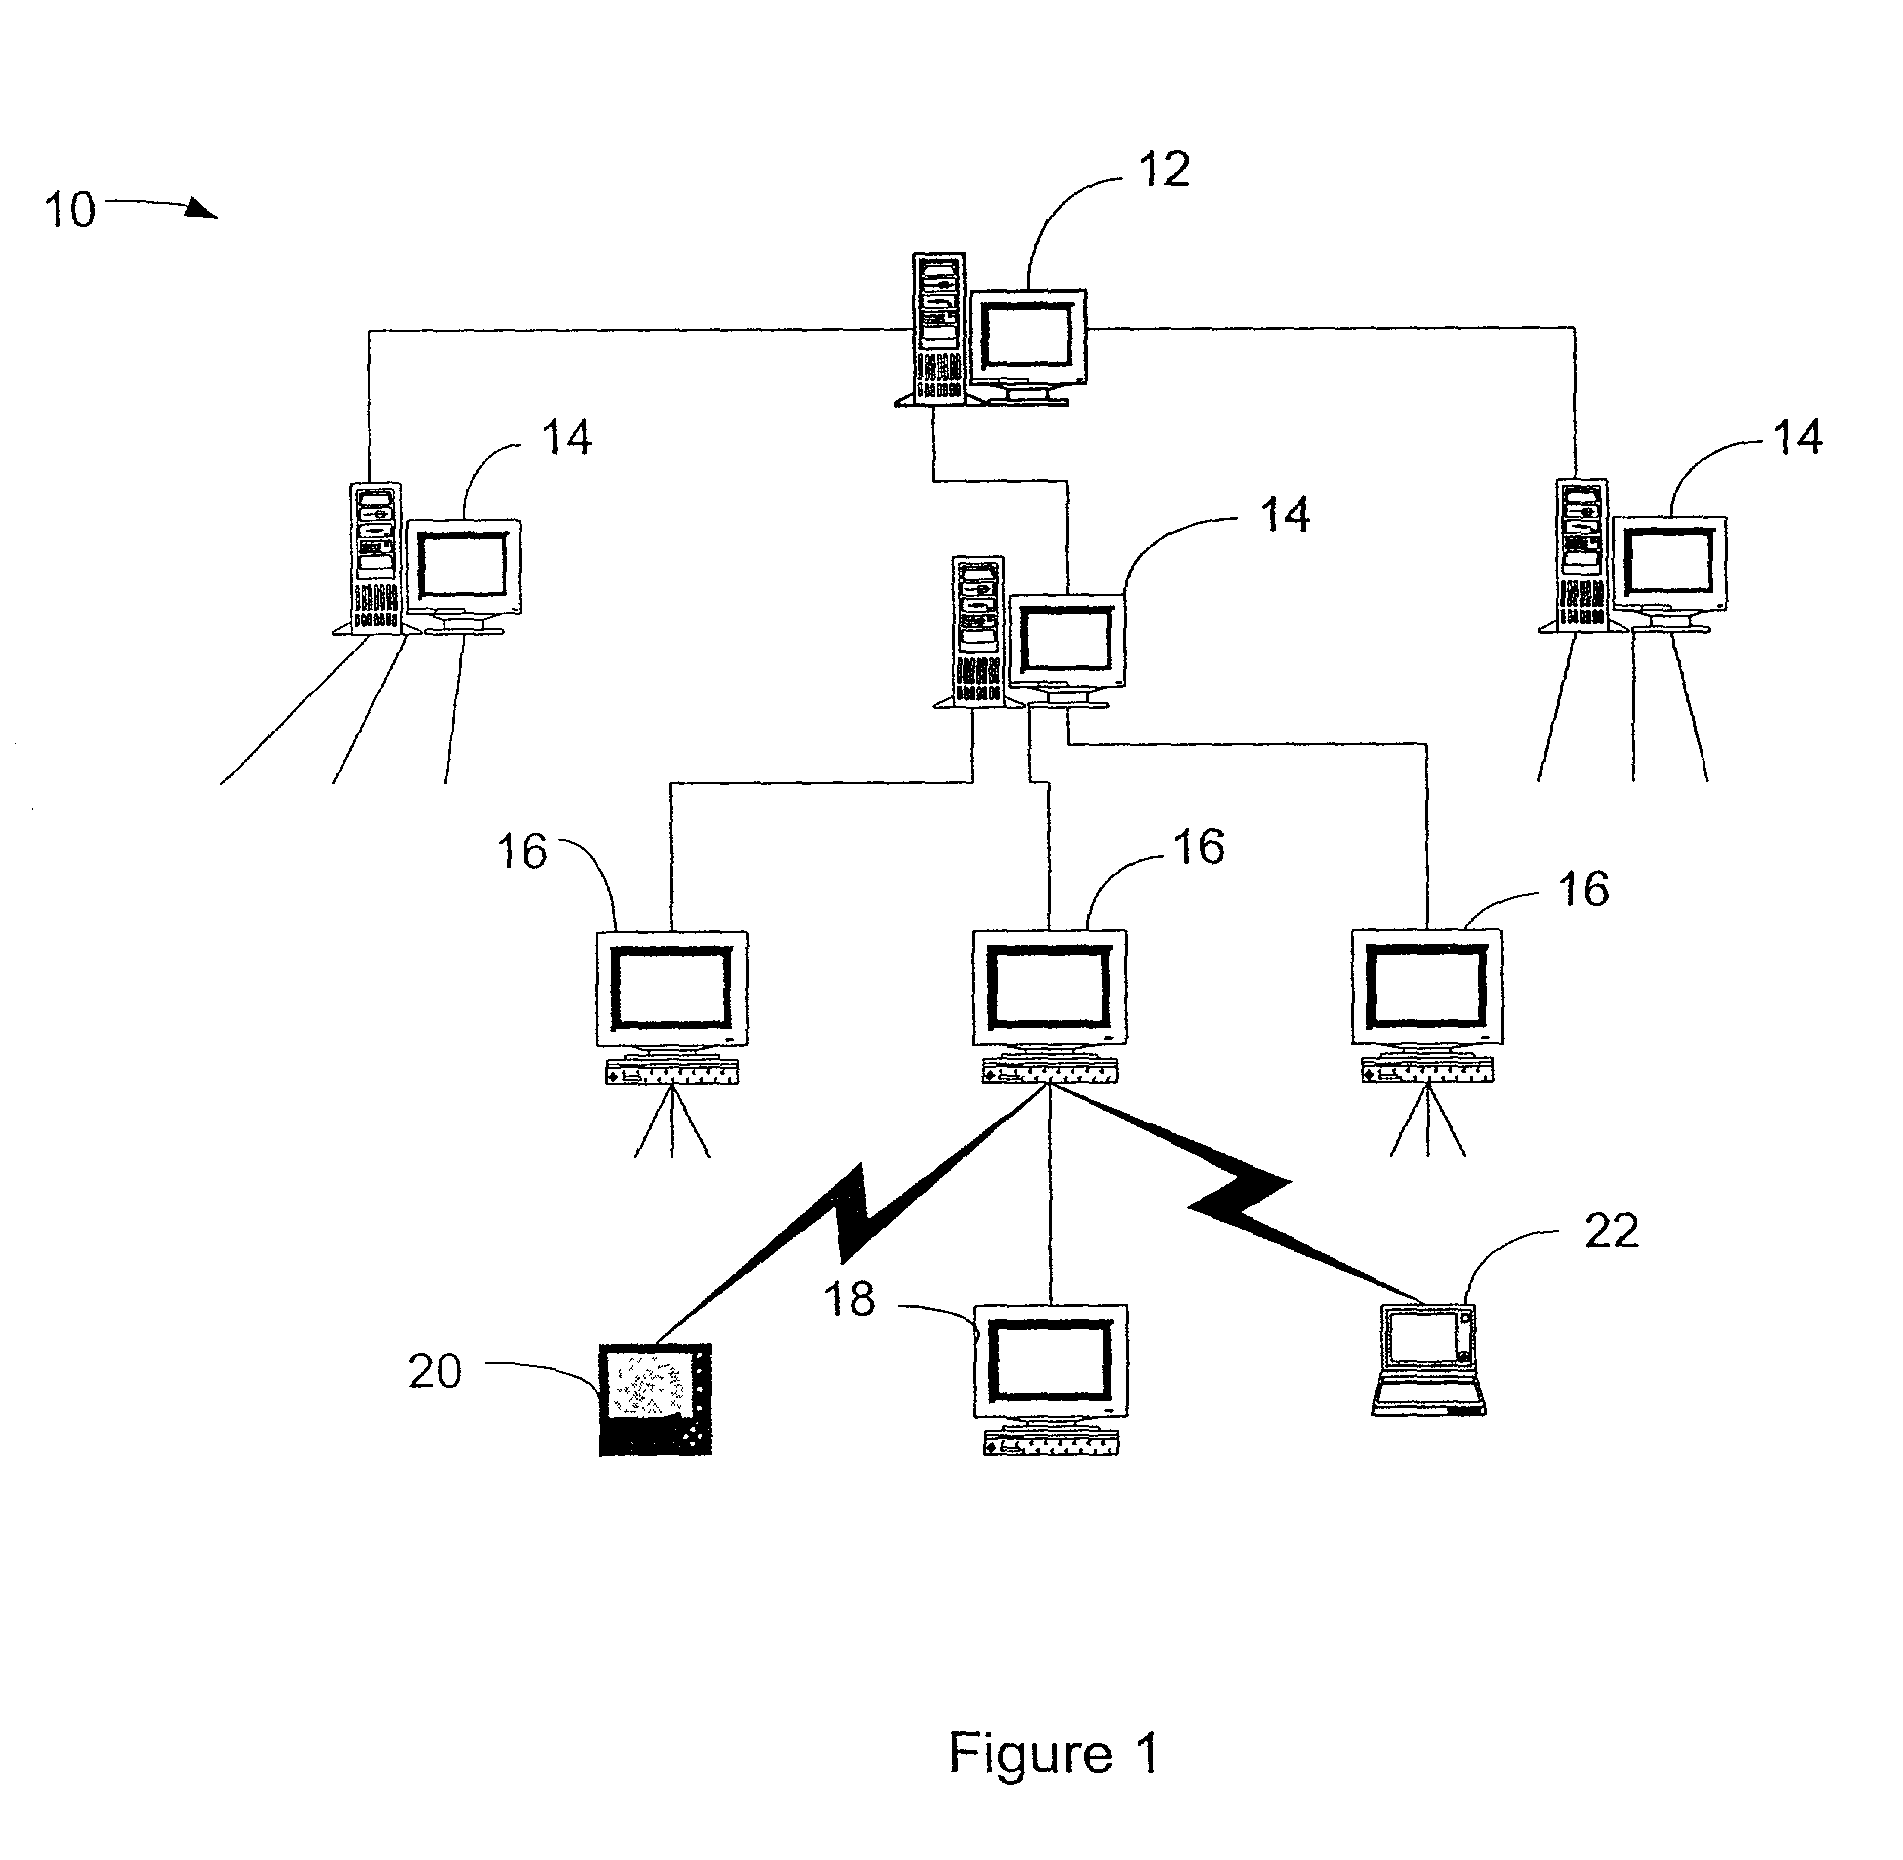 Method and system for managing information on a network